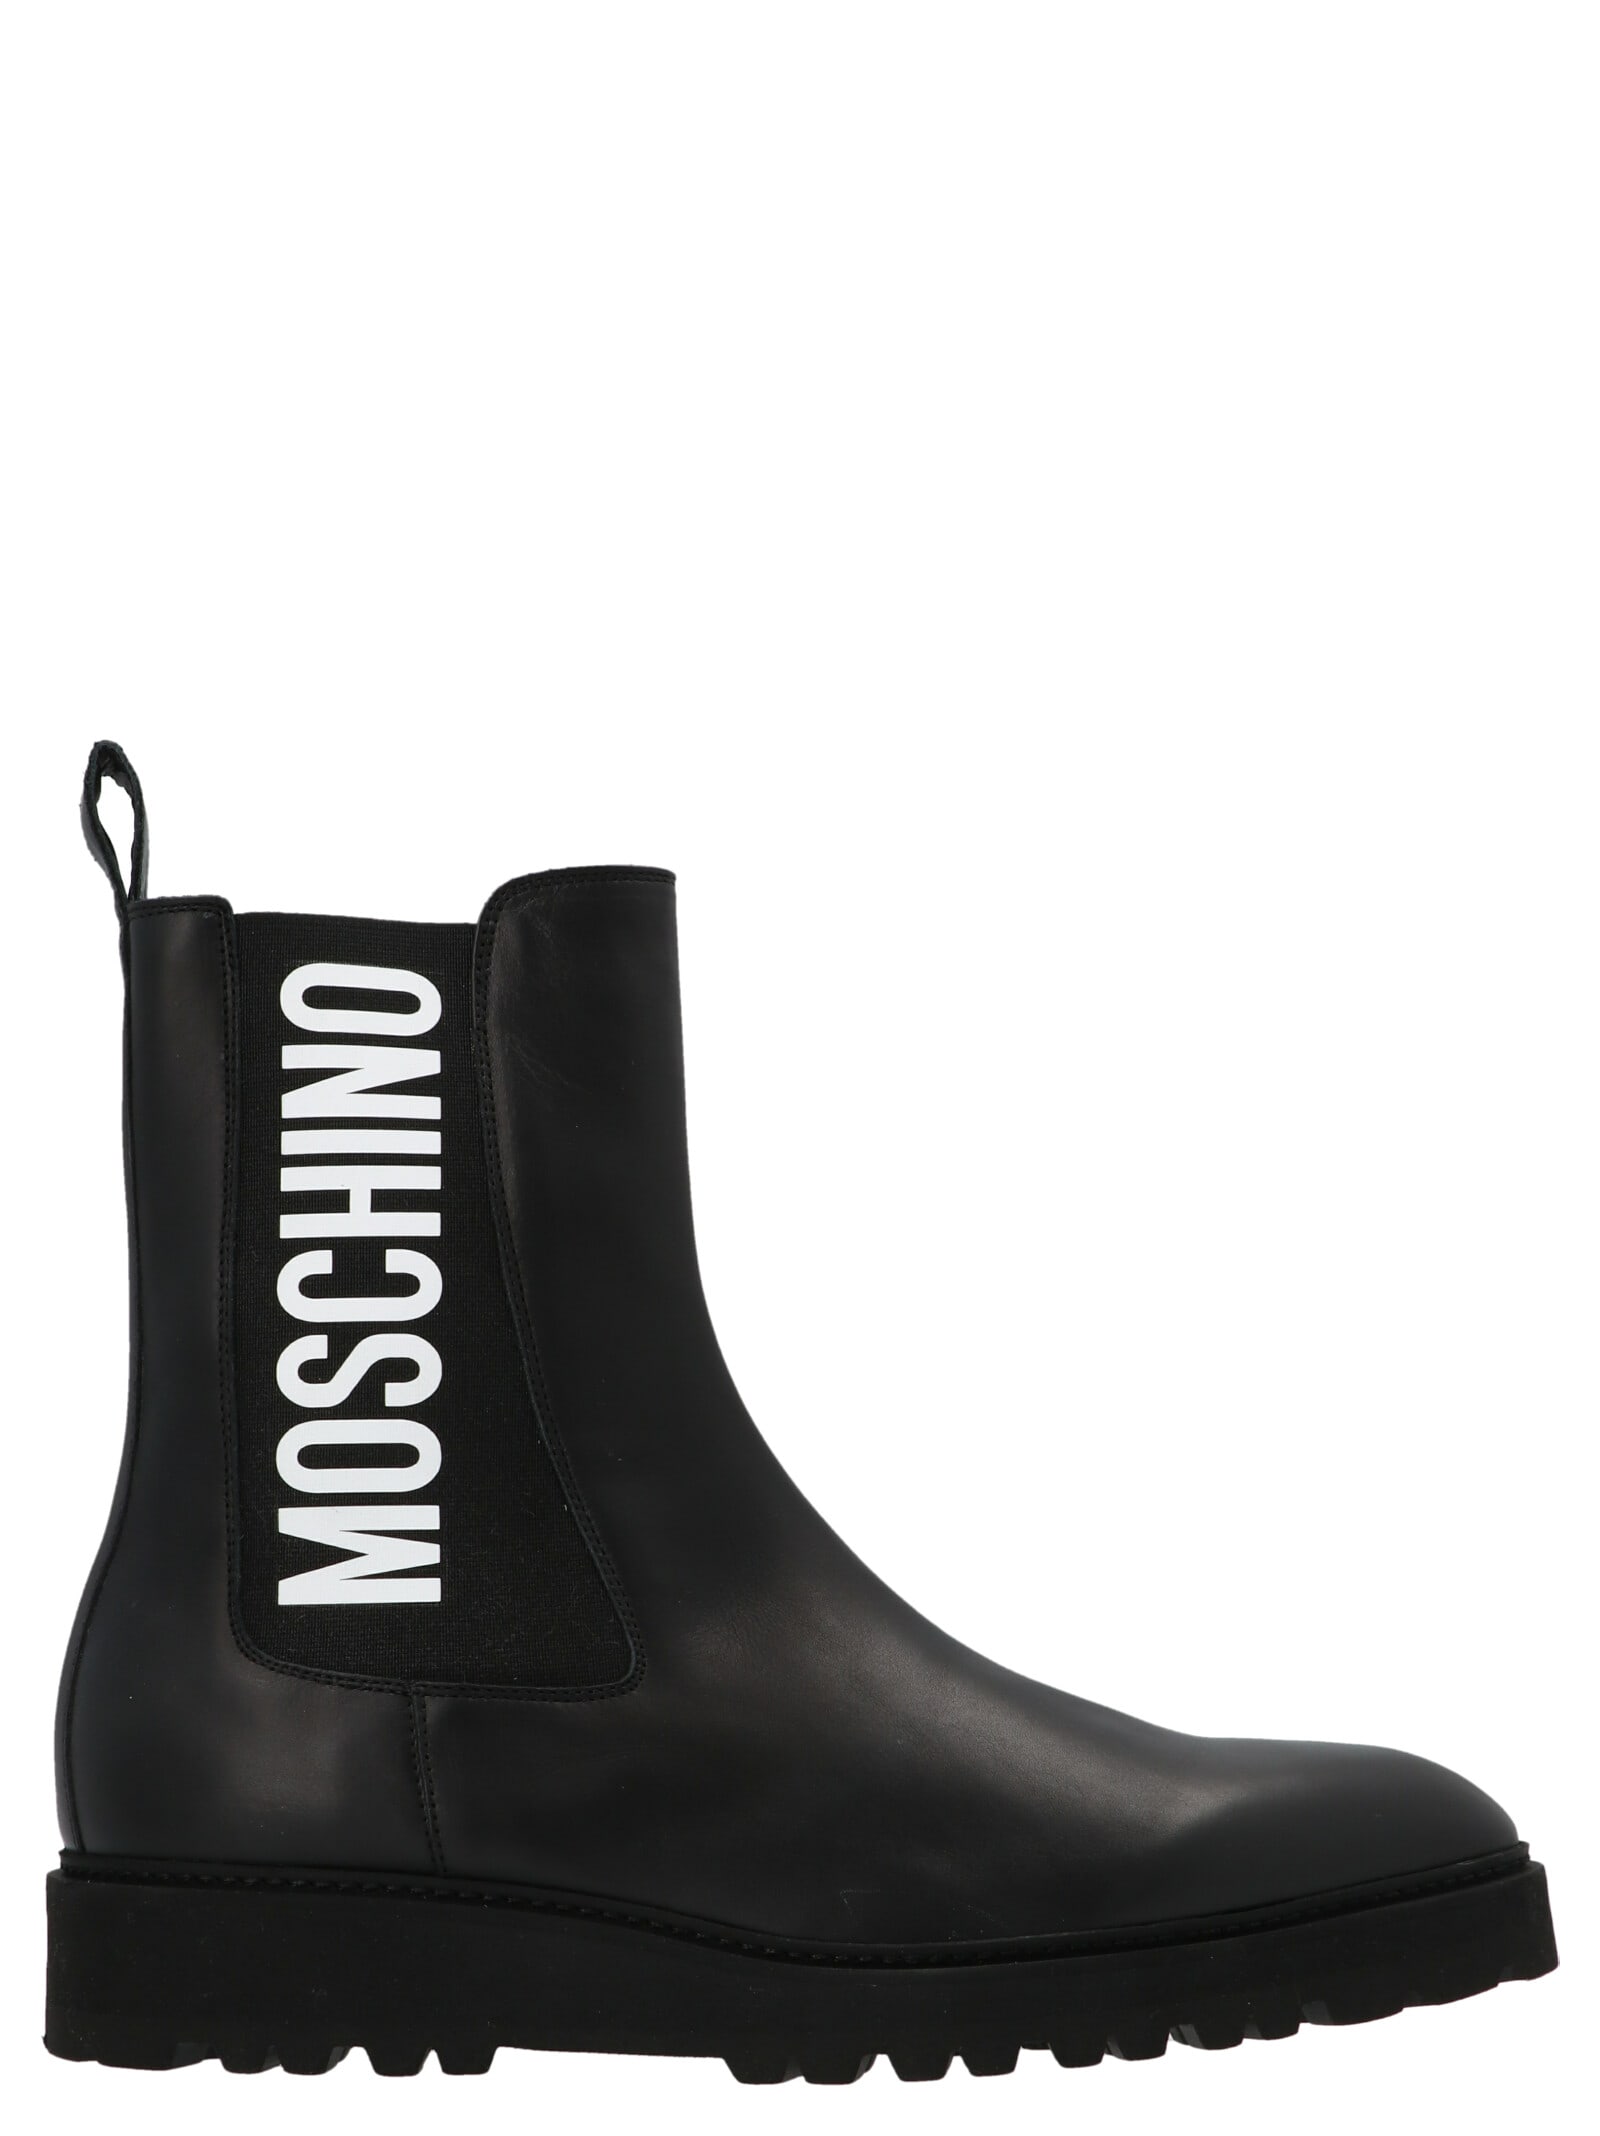 Moschino label Shoes